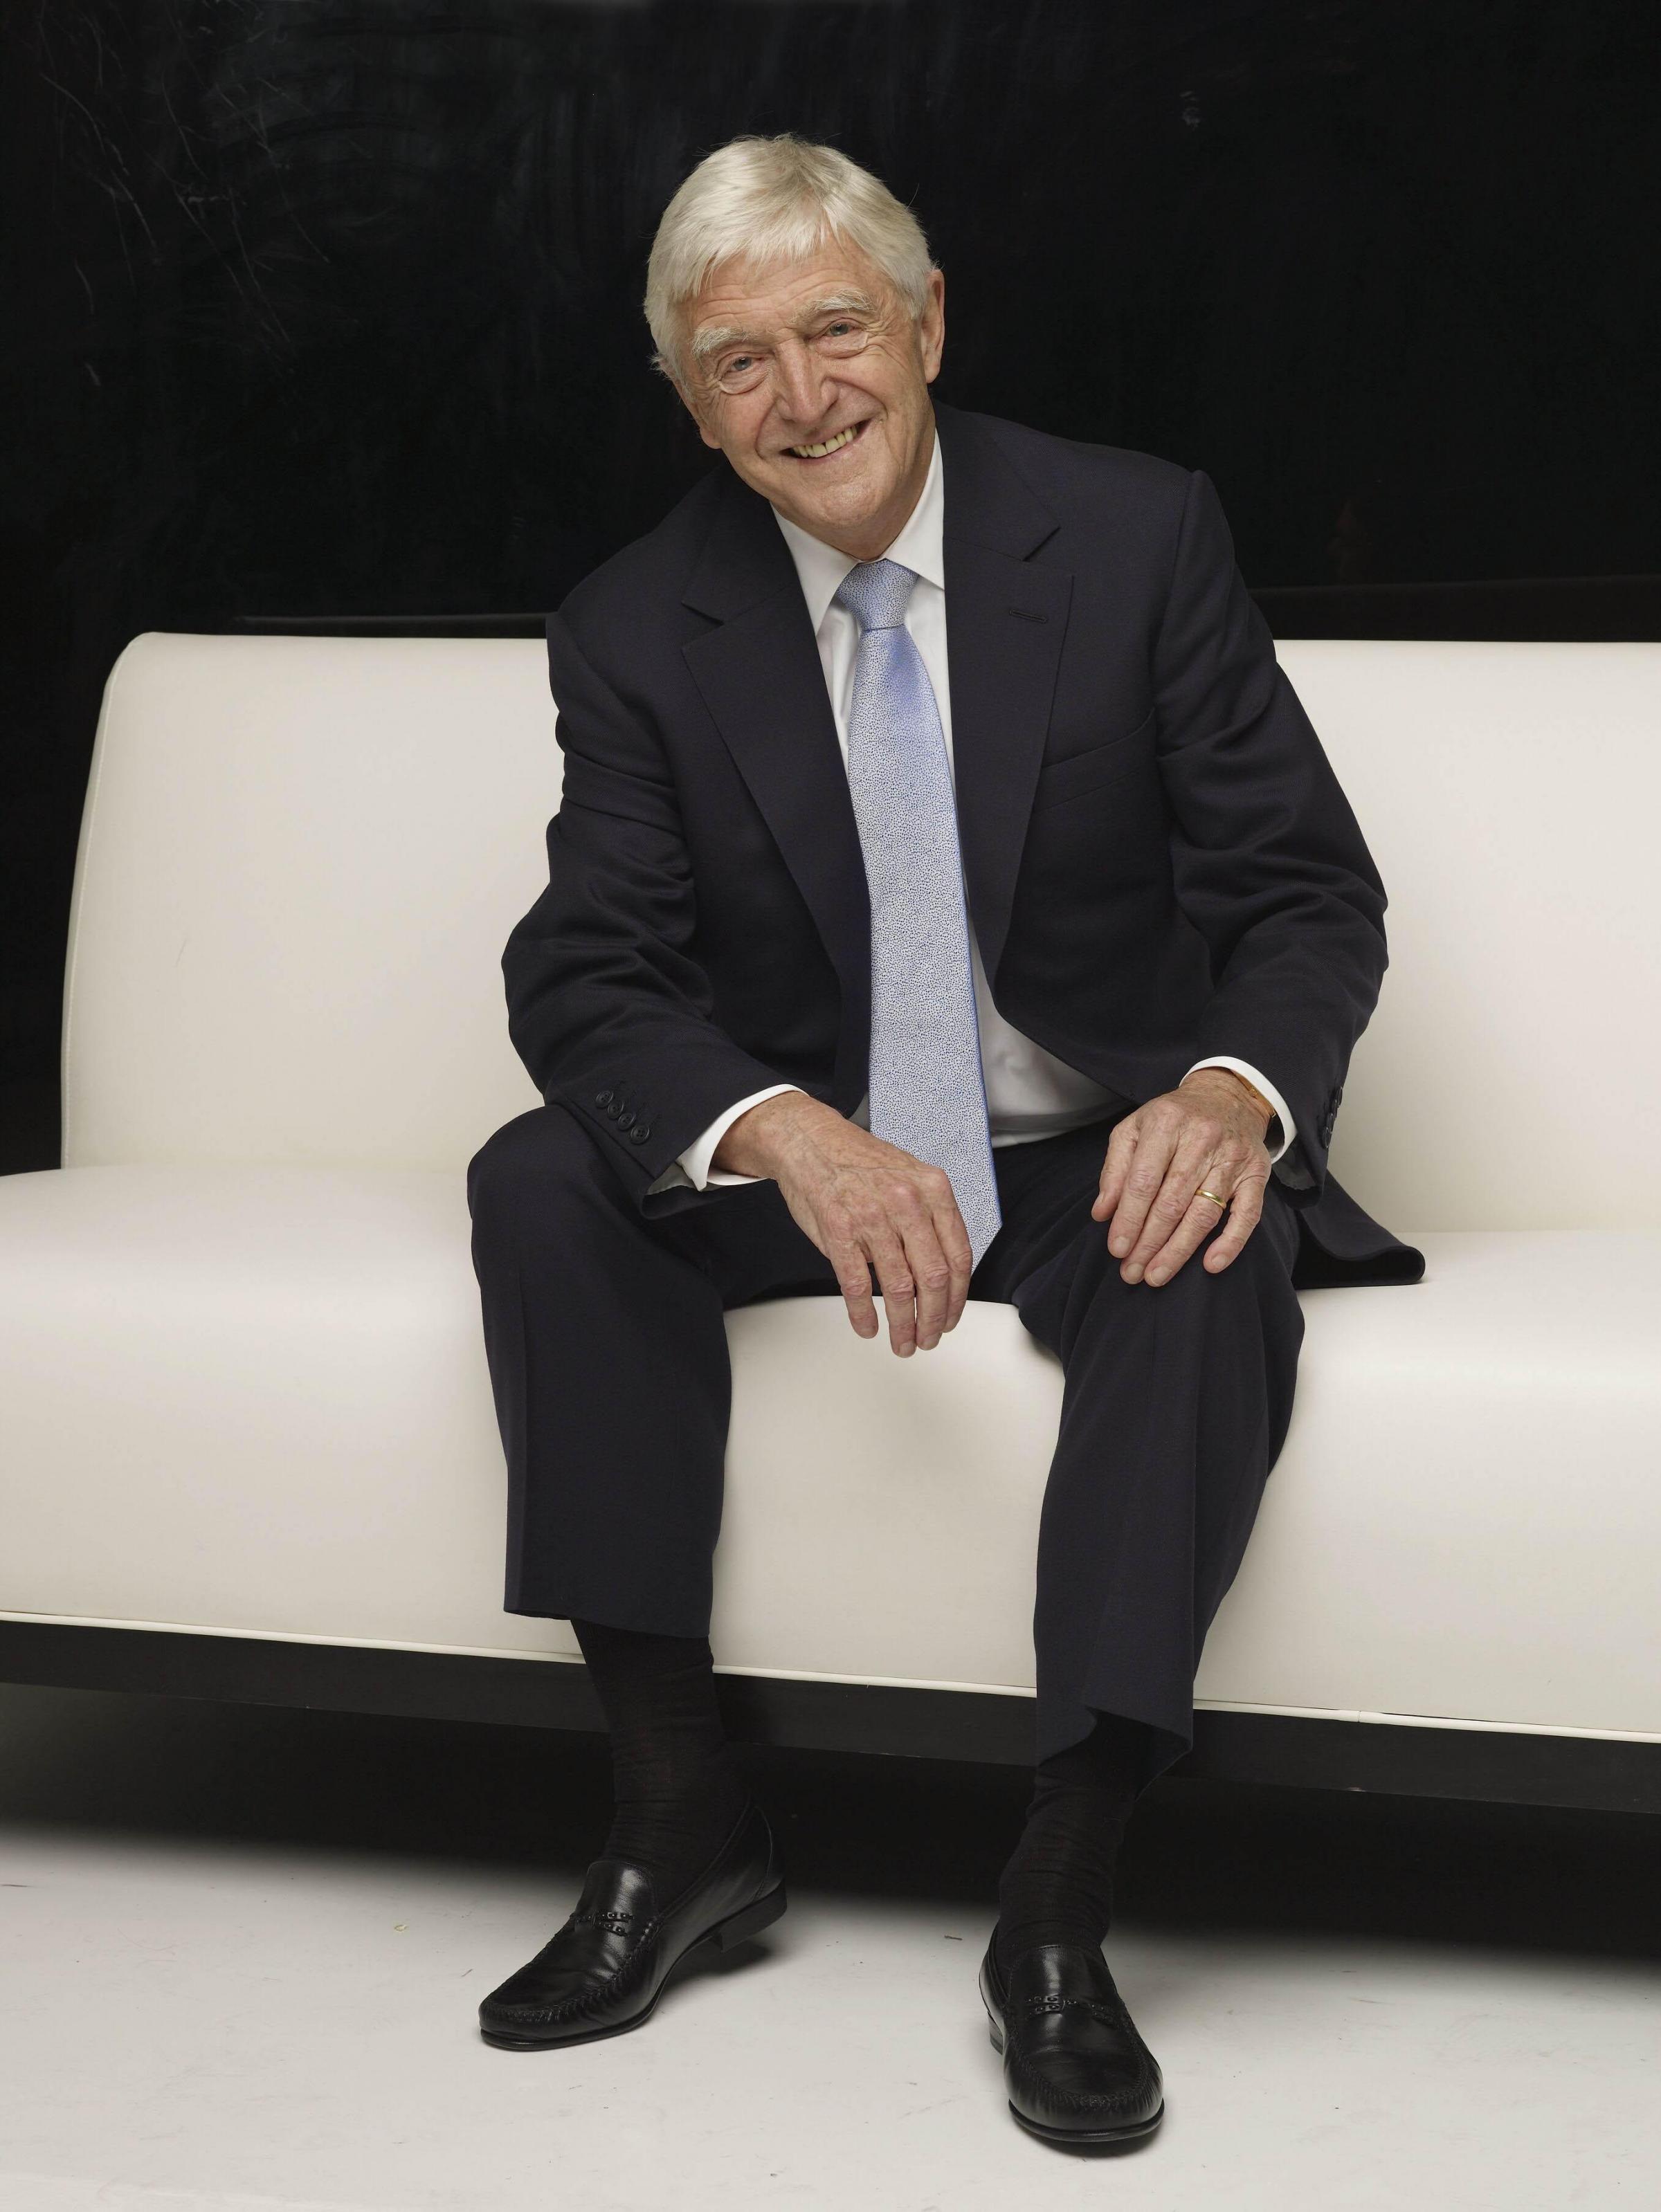 Sir Michael Parkinson is looking forward to his set of shows across the UK